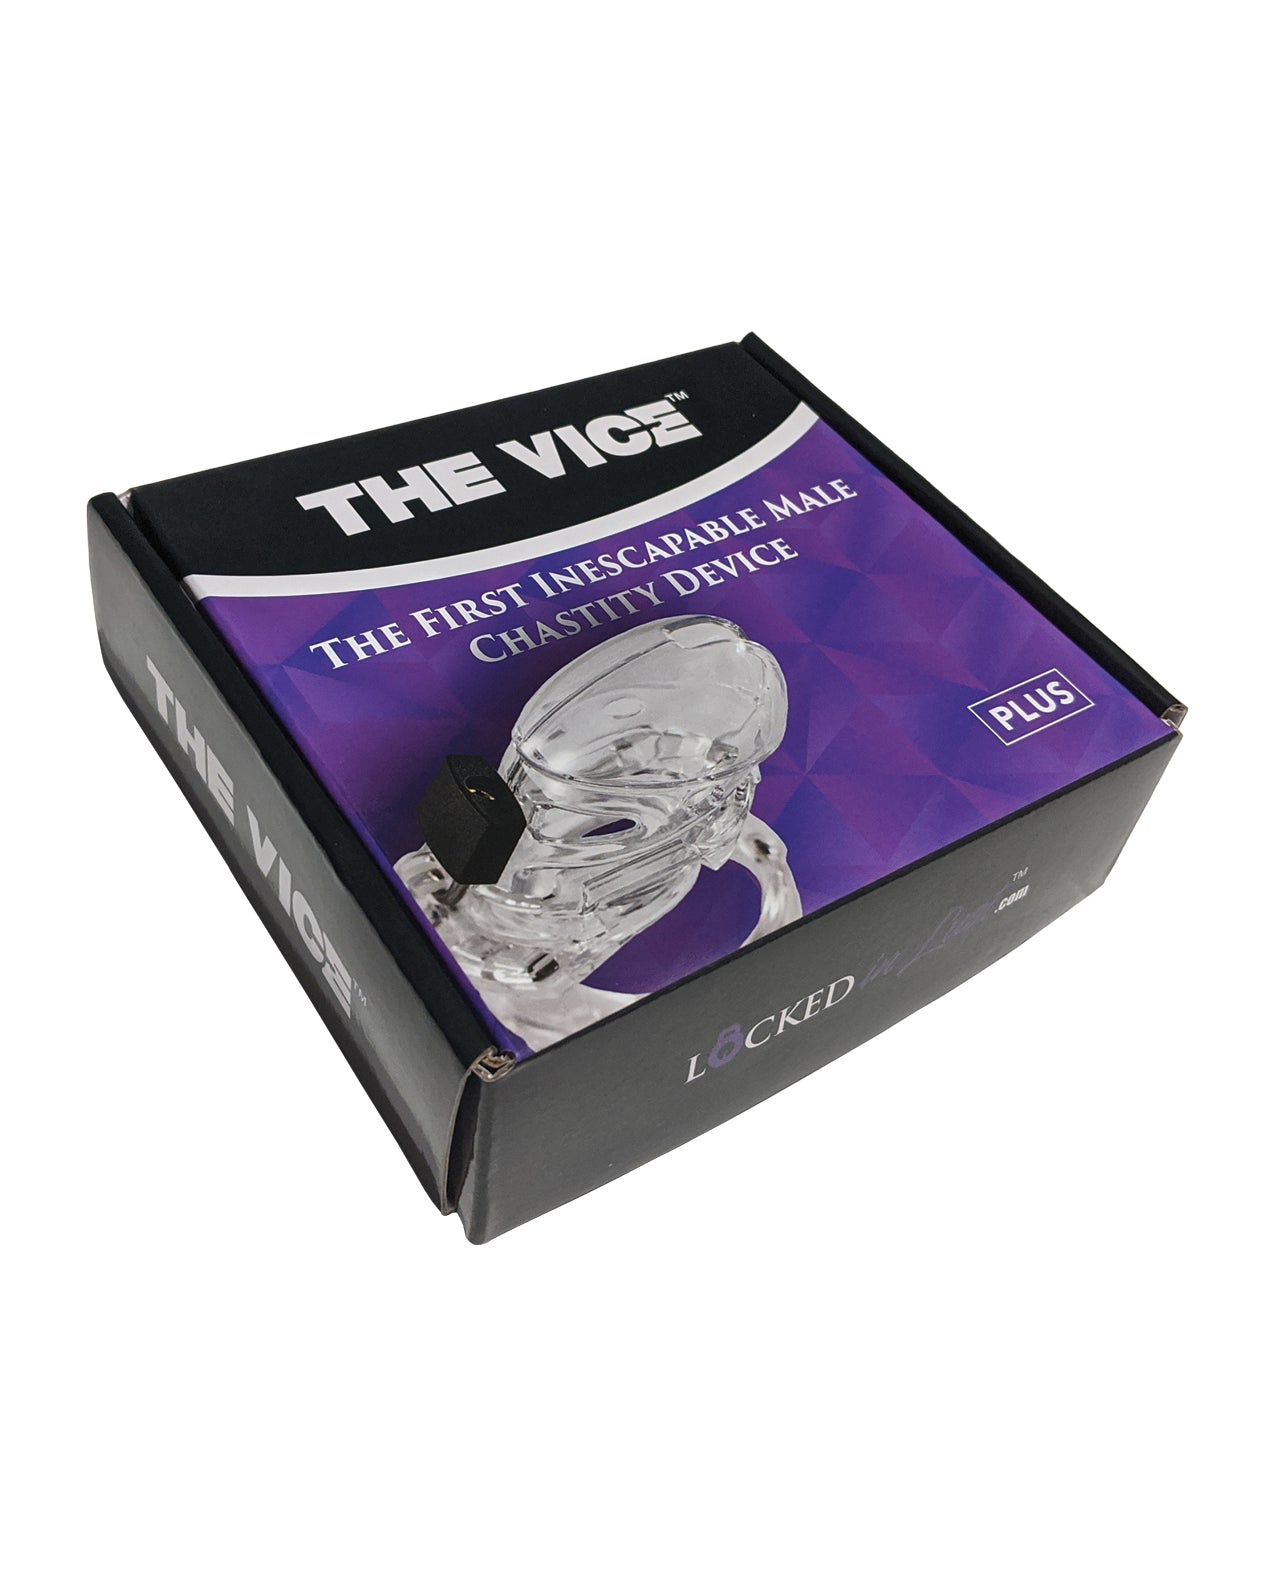 The Vice™ Plus by Locked In Lust in Color Choices Pink, Purple, and Clear